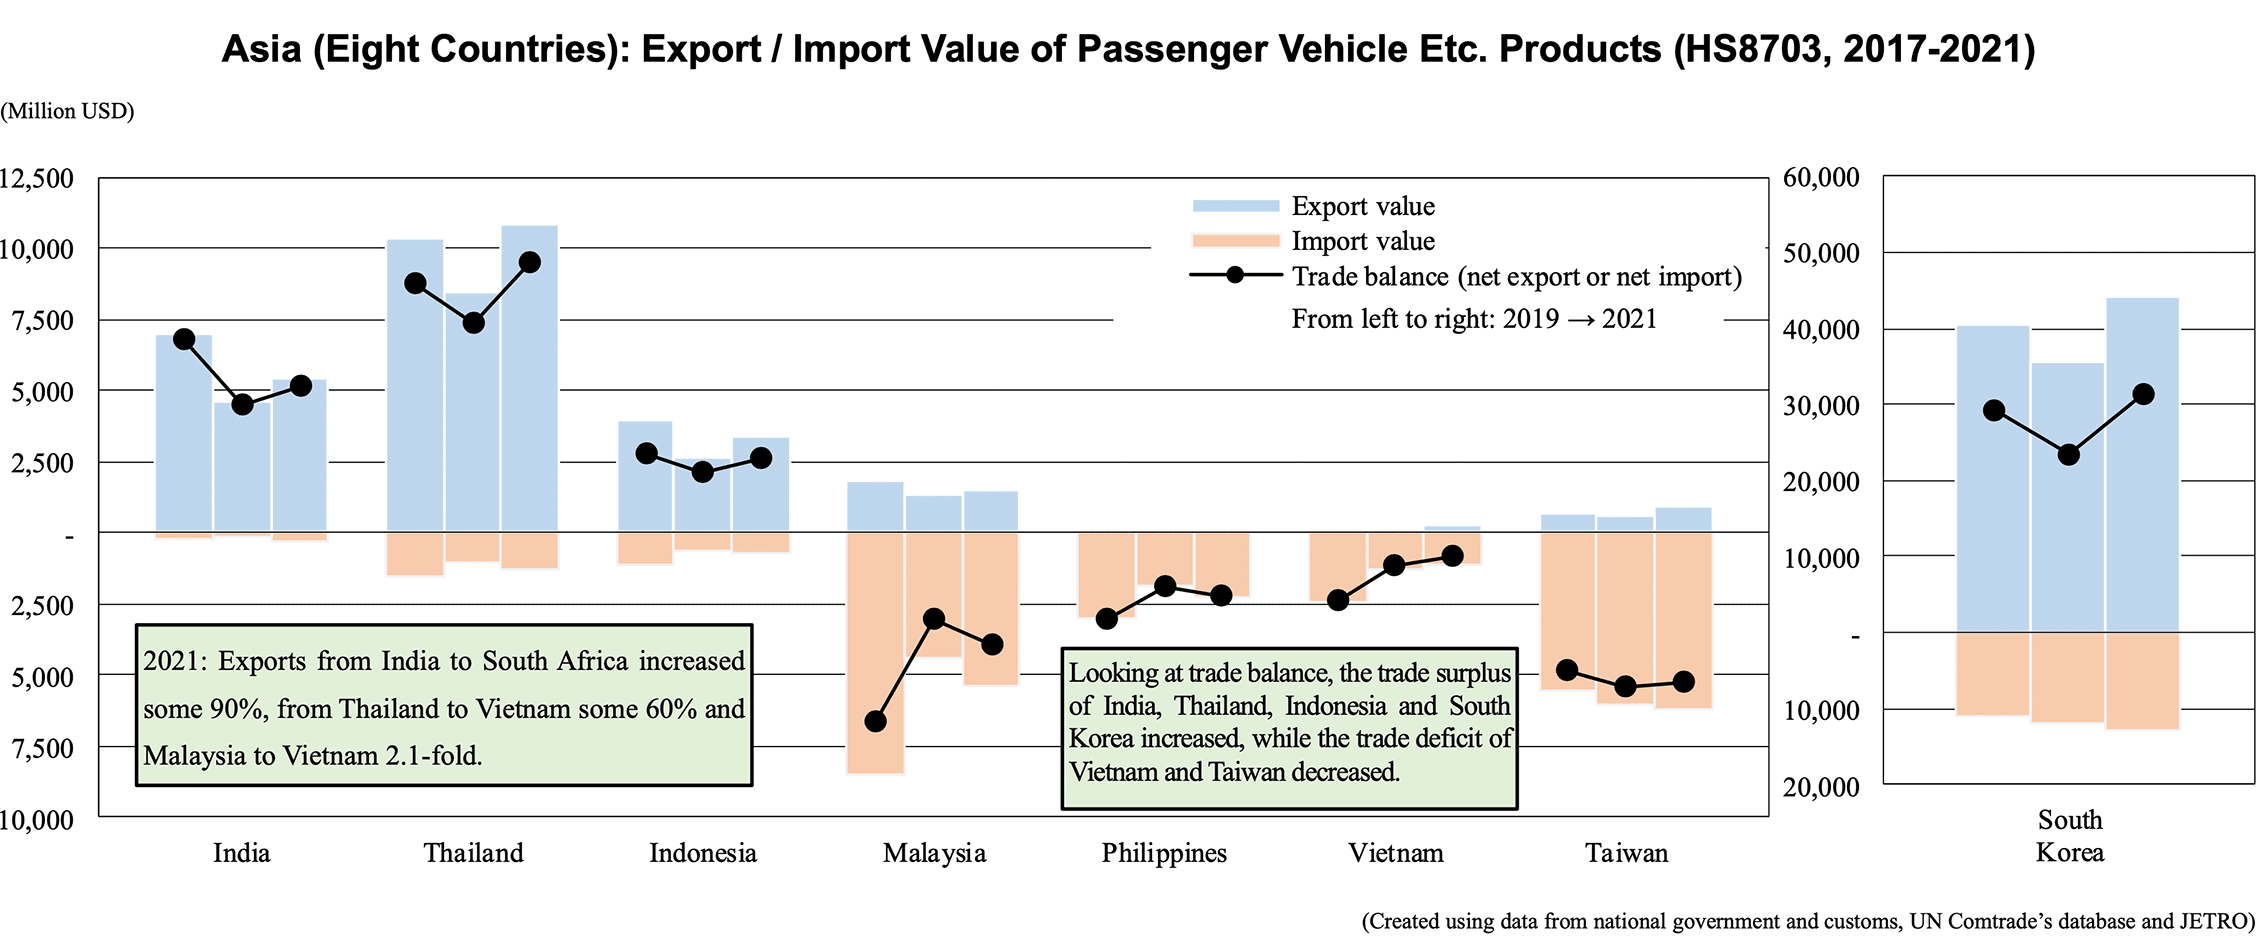 Bar graphs: Asia (Eight Countries): Export / Import Value of Passenger Vehicle Etc. Products (HS8703, 2017-2021)